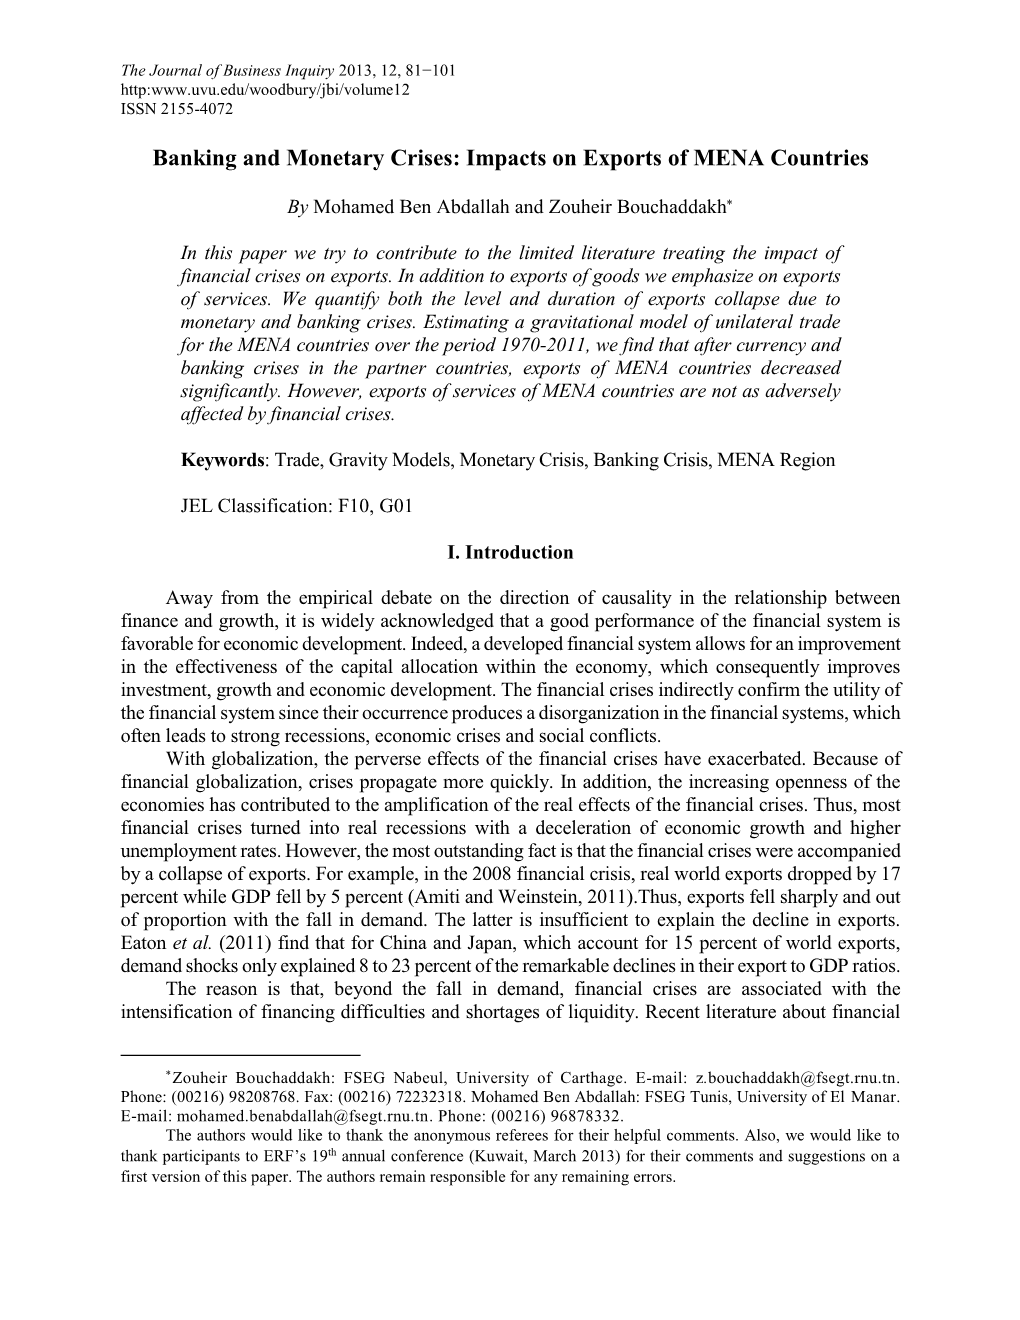 Banking and Monetary Crises: Impacts on Exports of MENA Countries